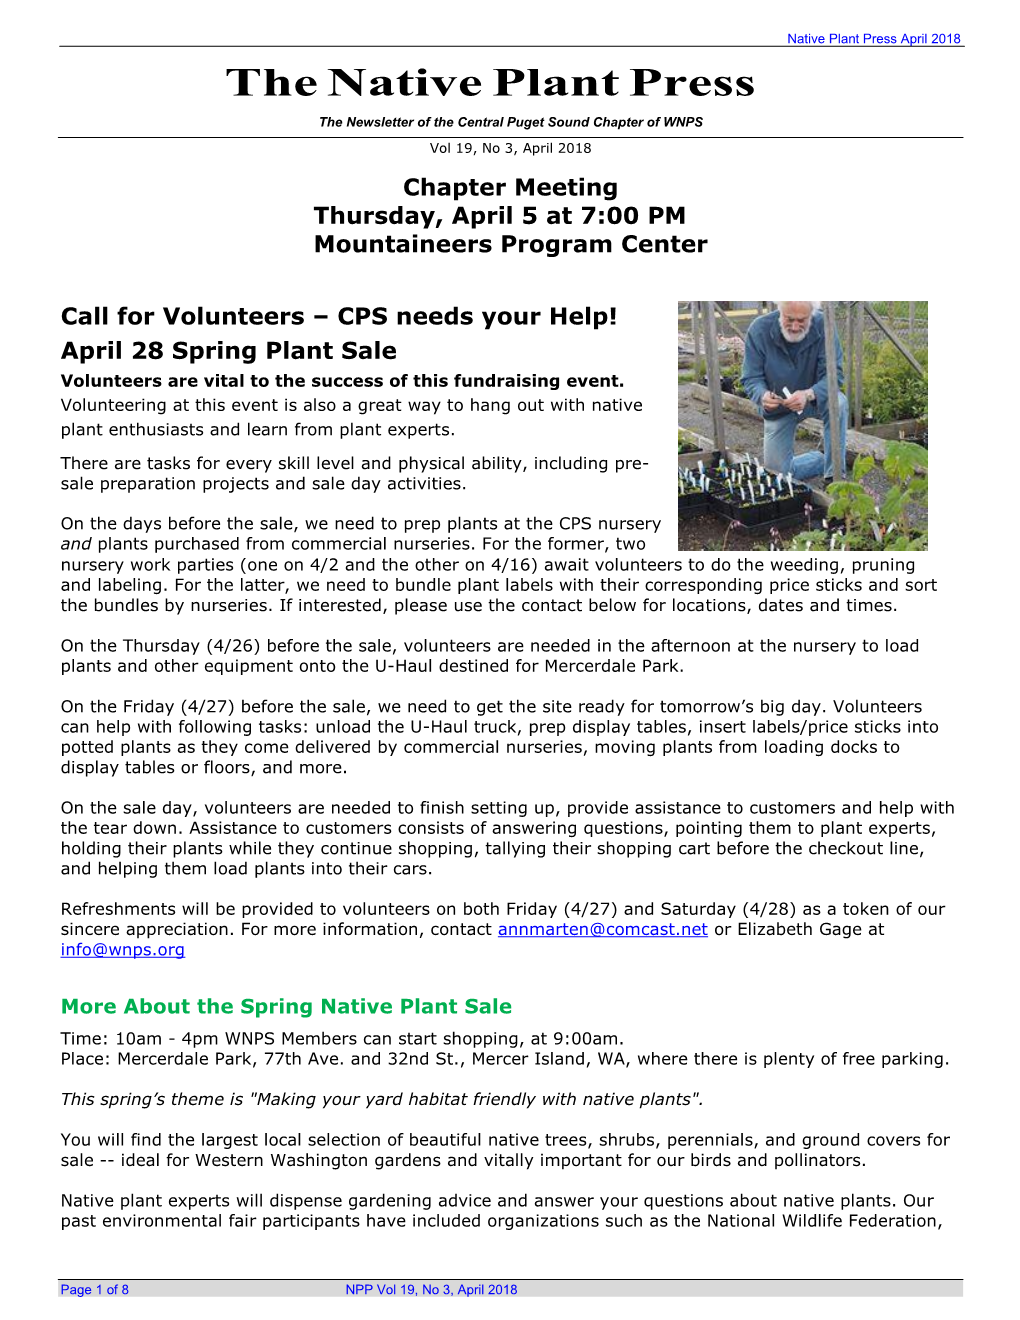 The Native Plant Press the Newsletter of the Central Puget Sound Chapter of WNPS Vol 19, No 3, April 2018